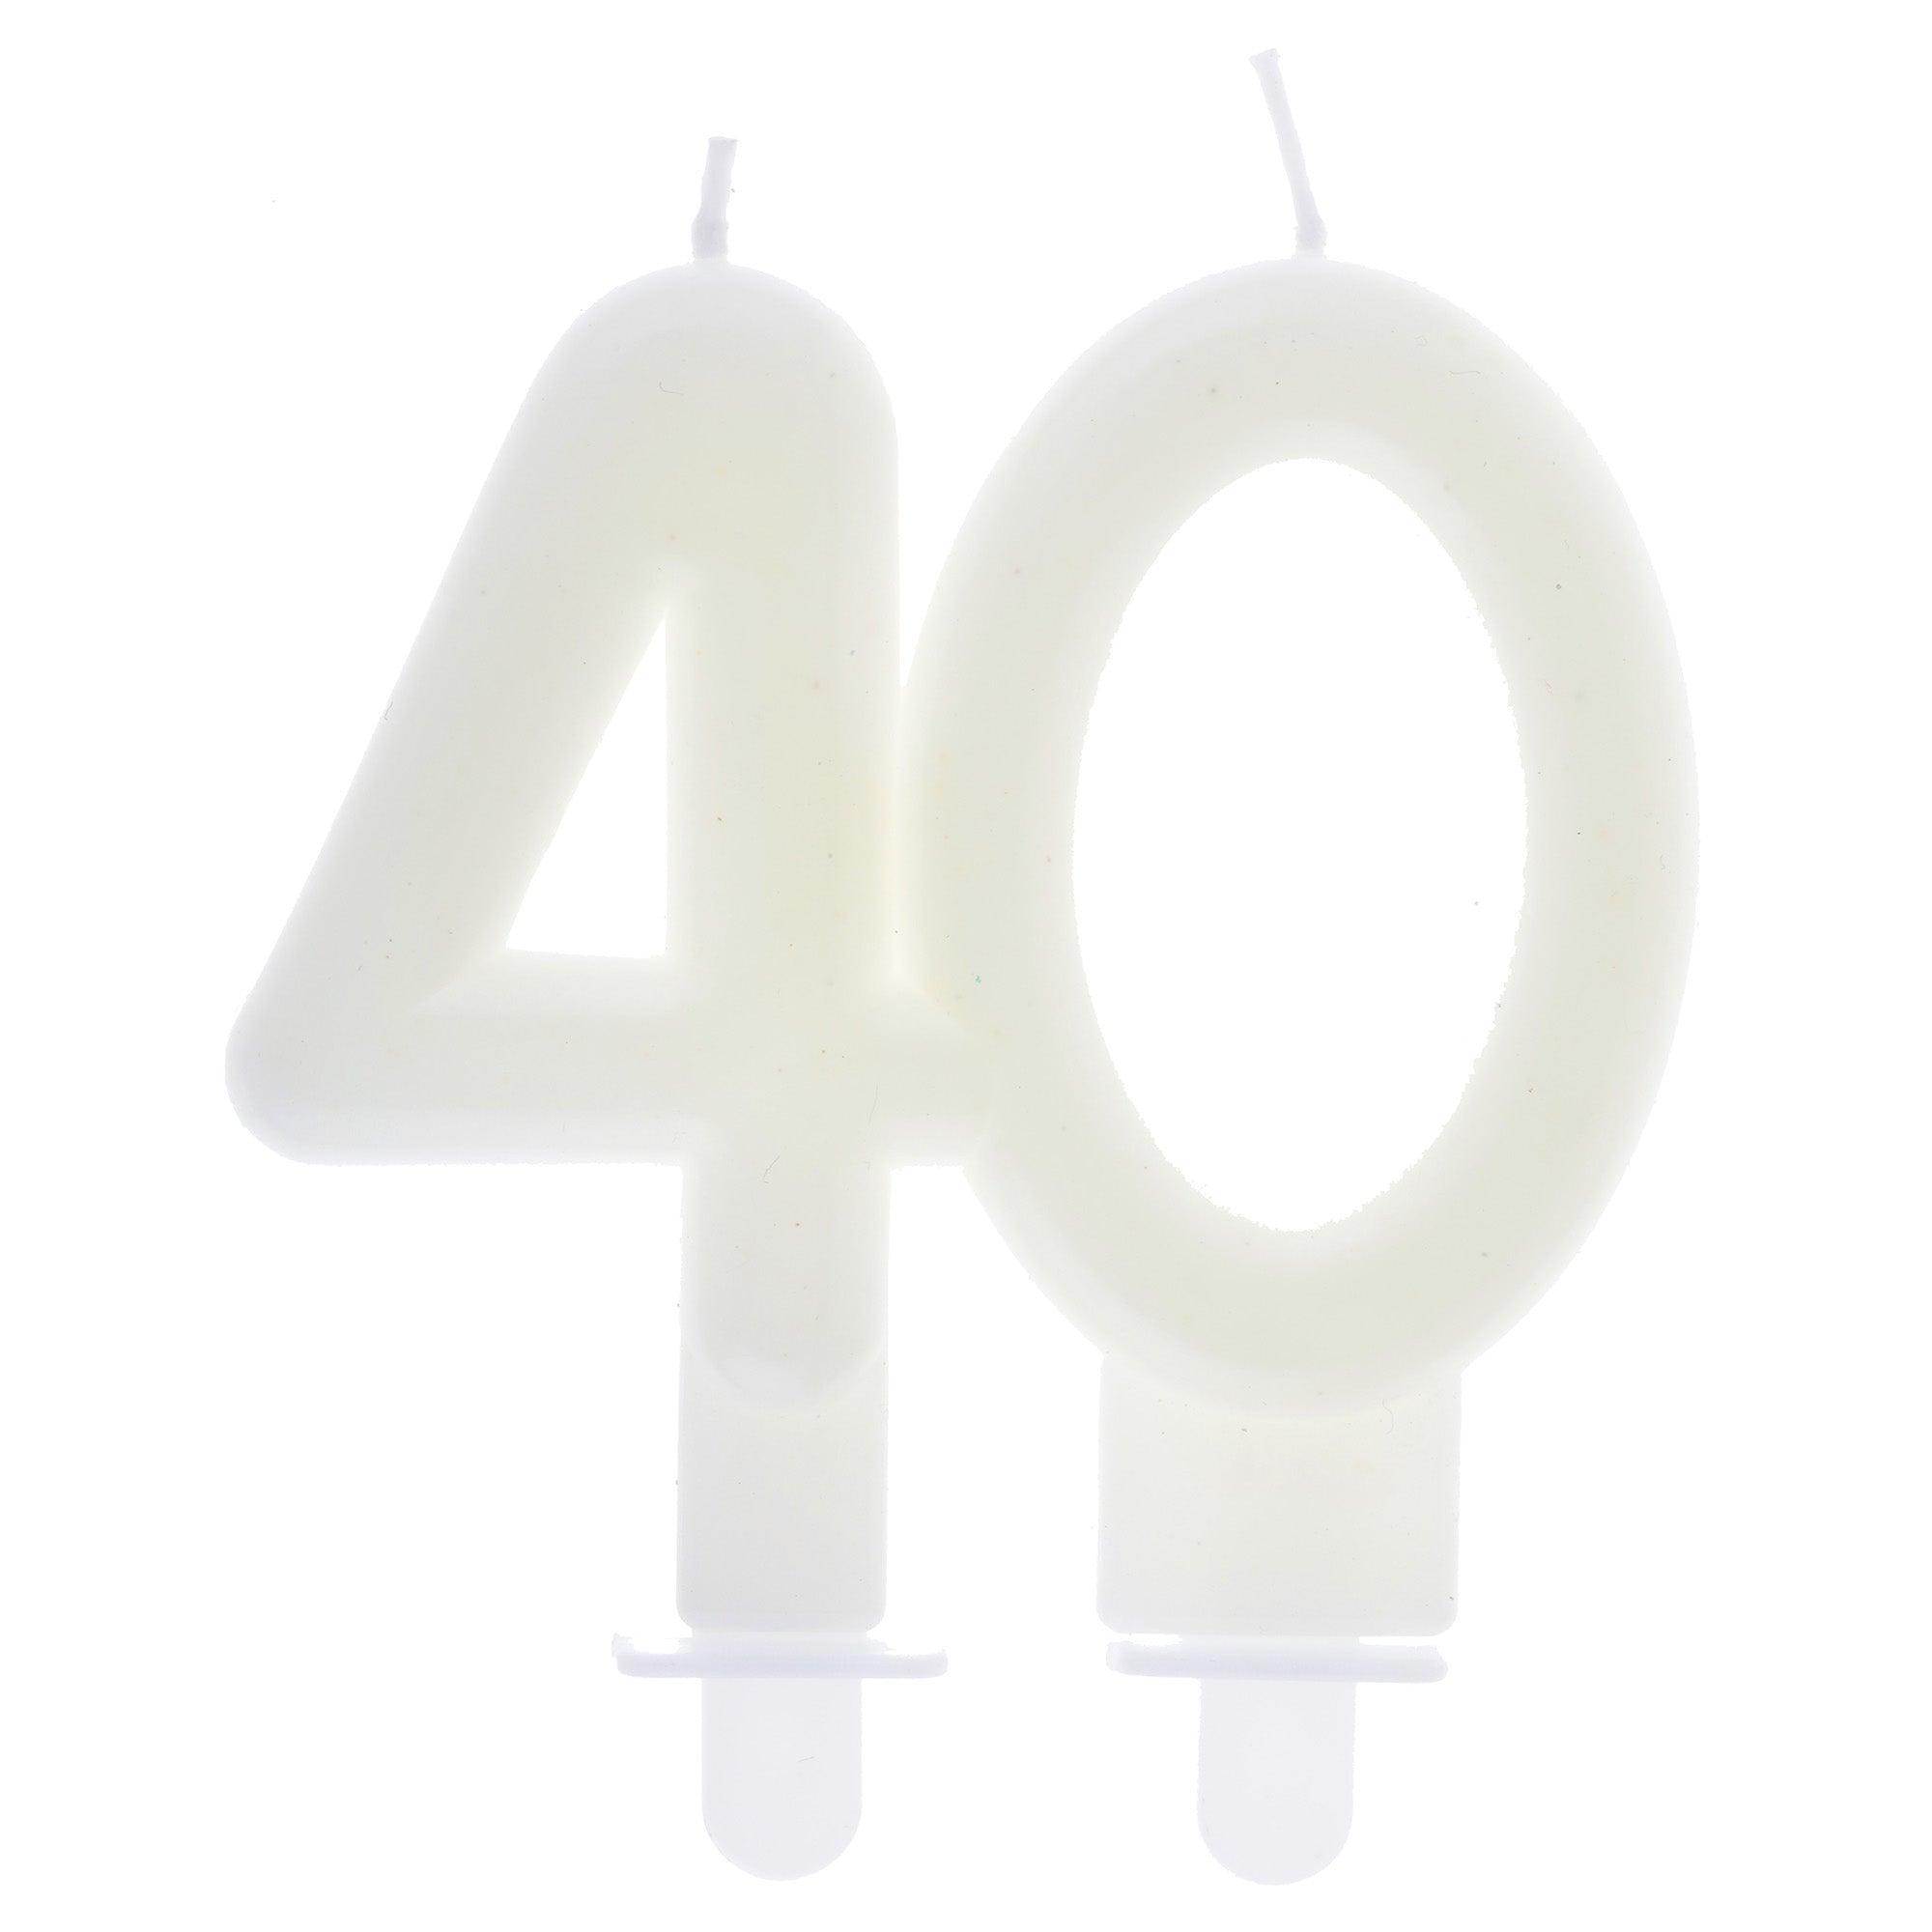 Age 40 Birthday Candle Phosphorescent 3x3.5in